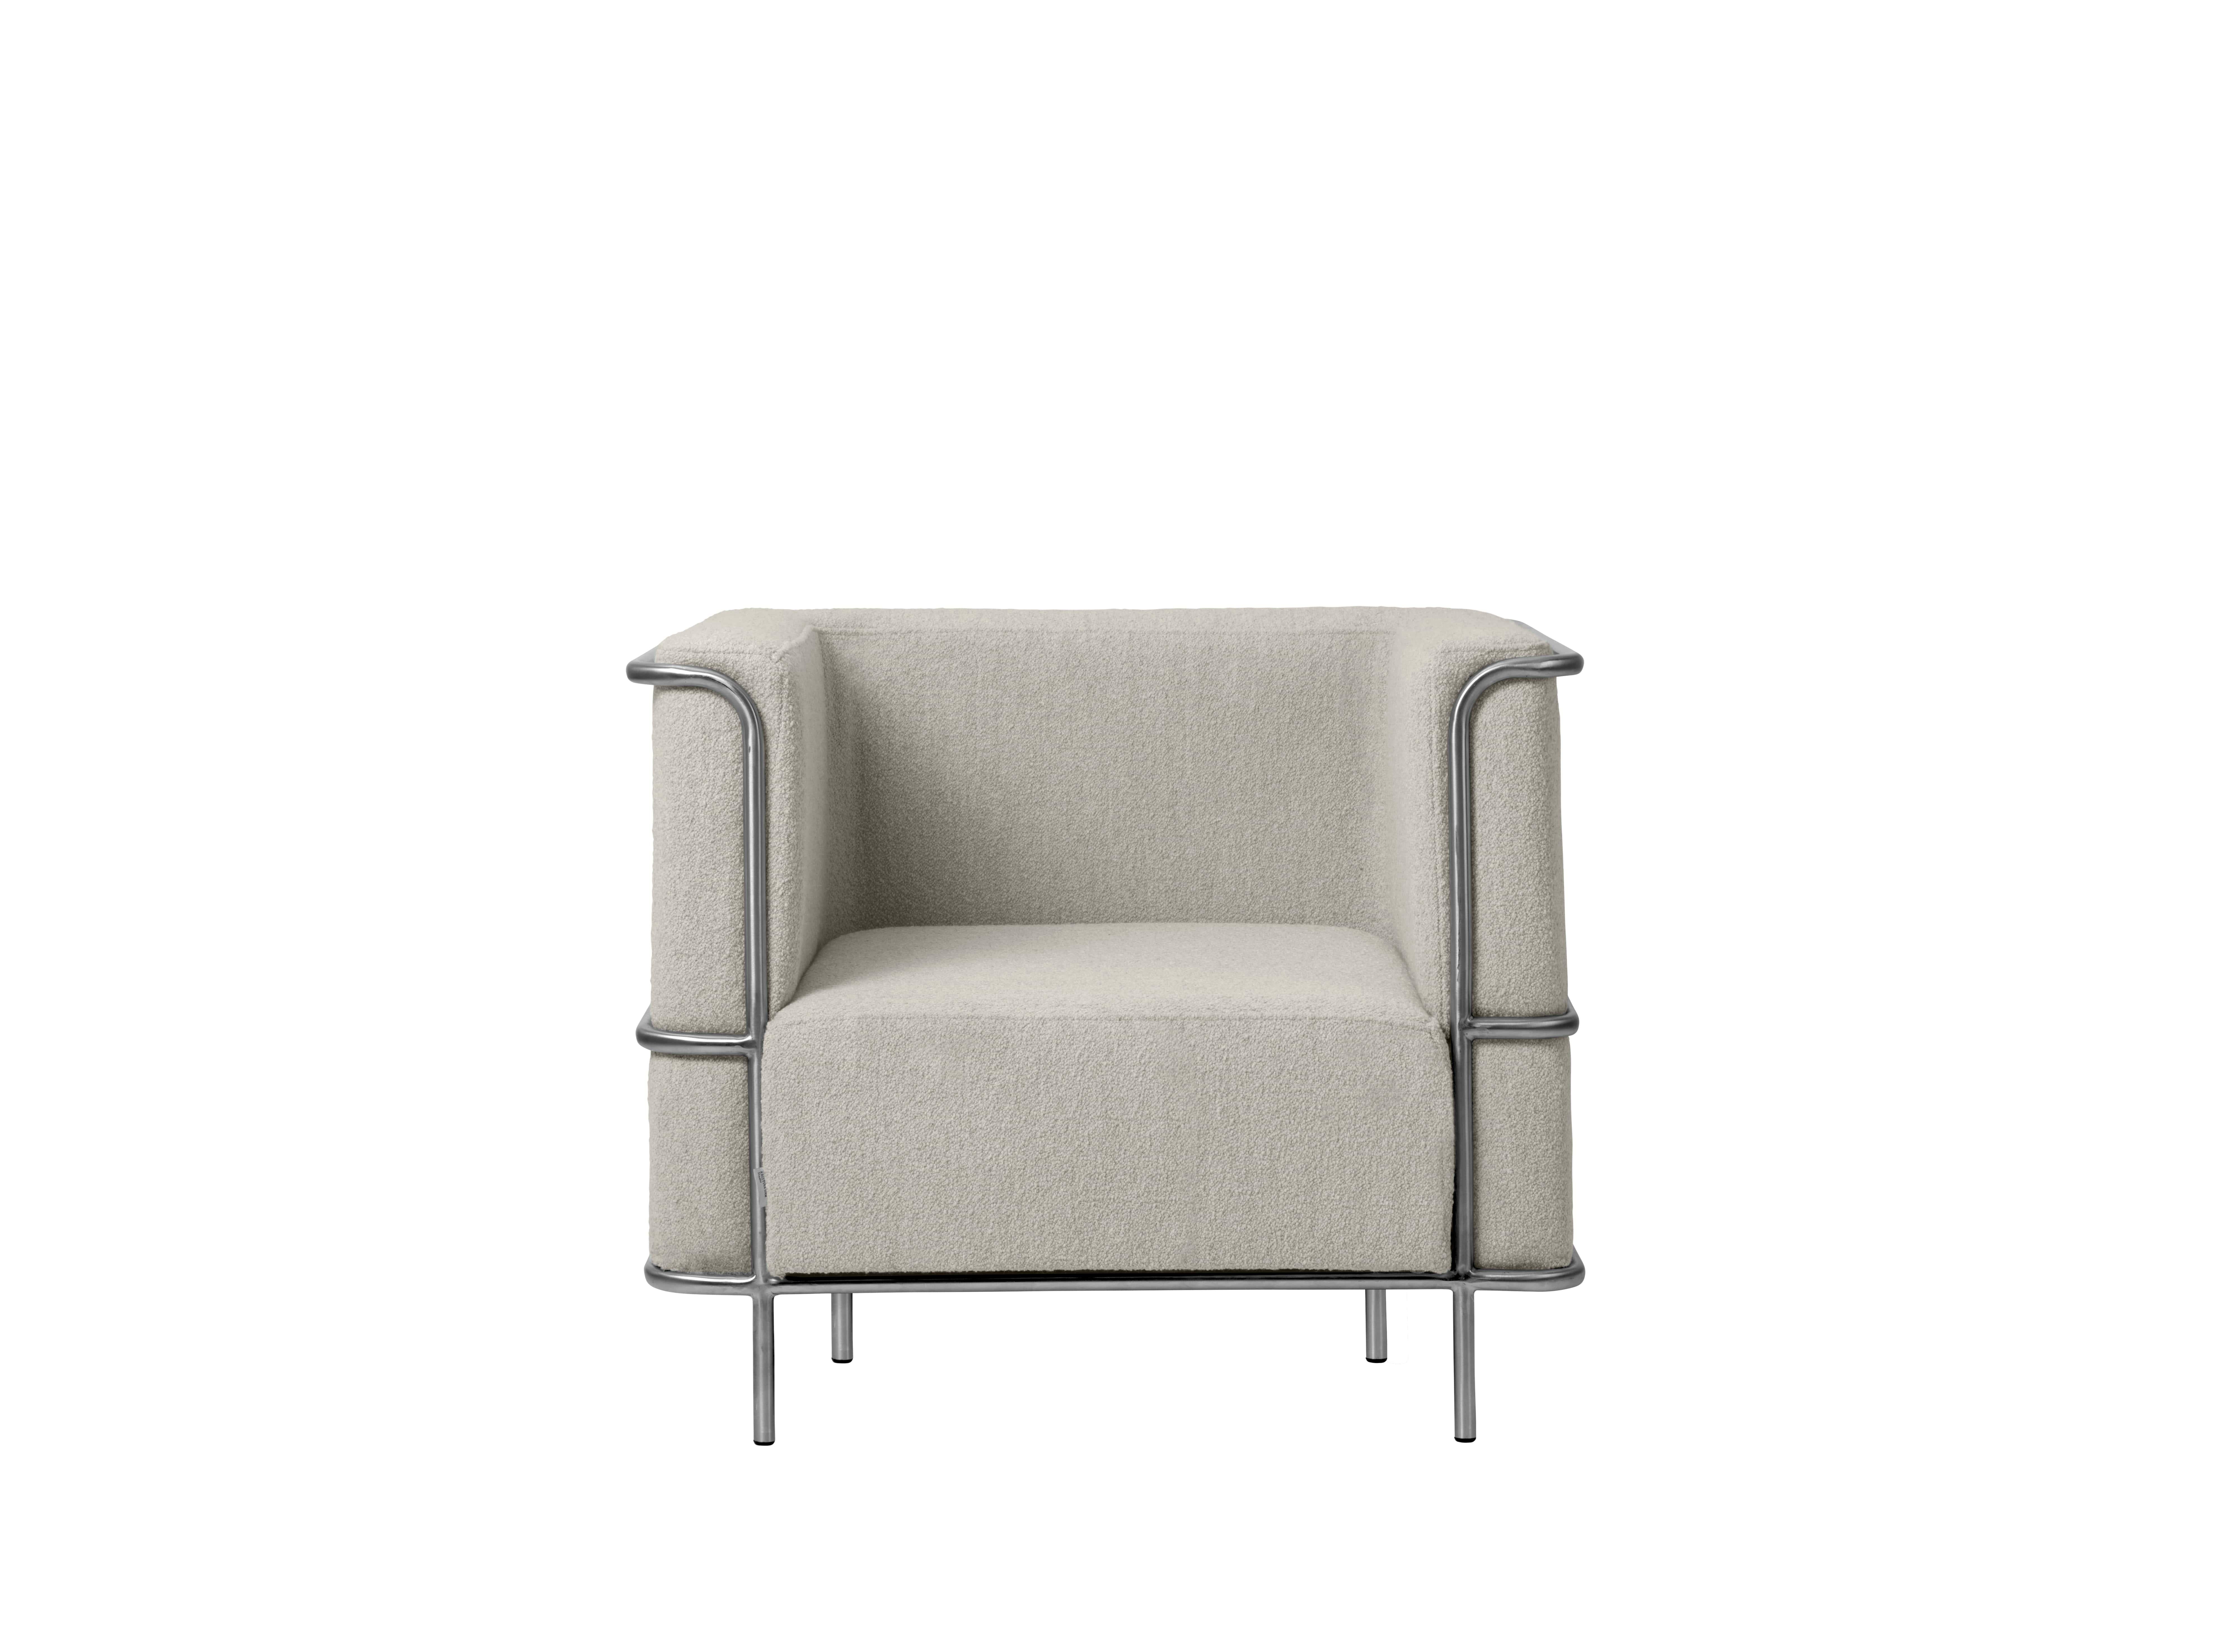 Modernist lounge chair by Kristina Dam Studio
Materials: Beige Boucle
Dimensions: 87 x 77 x 70 cm


Kristina Dam graduated from The Royal Danish School of Fine Arts, Architecture and Design in Copenhagen. In her designs you will find her great